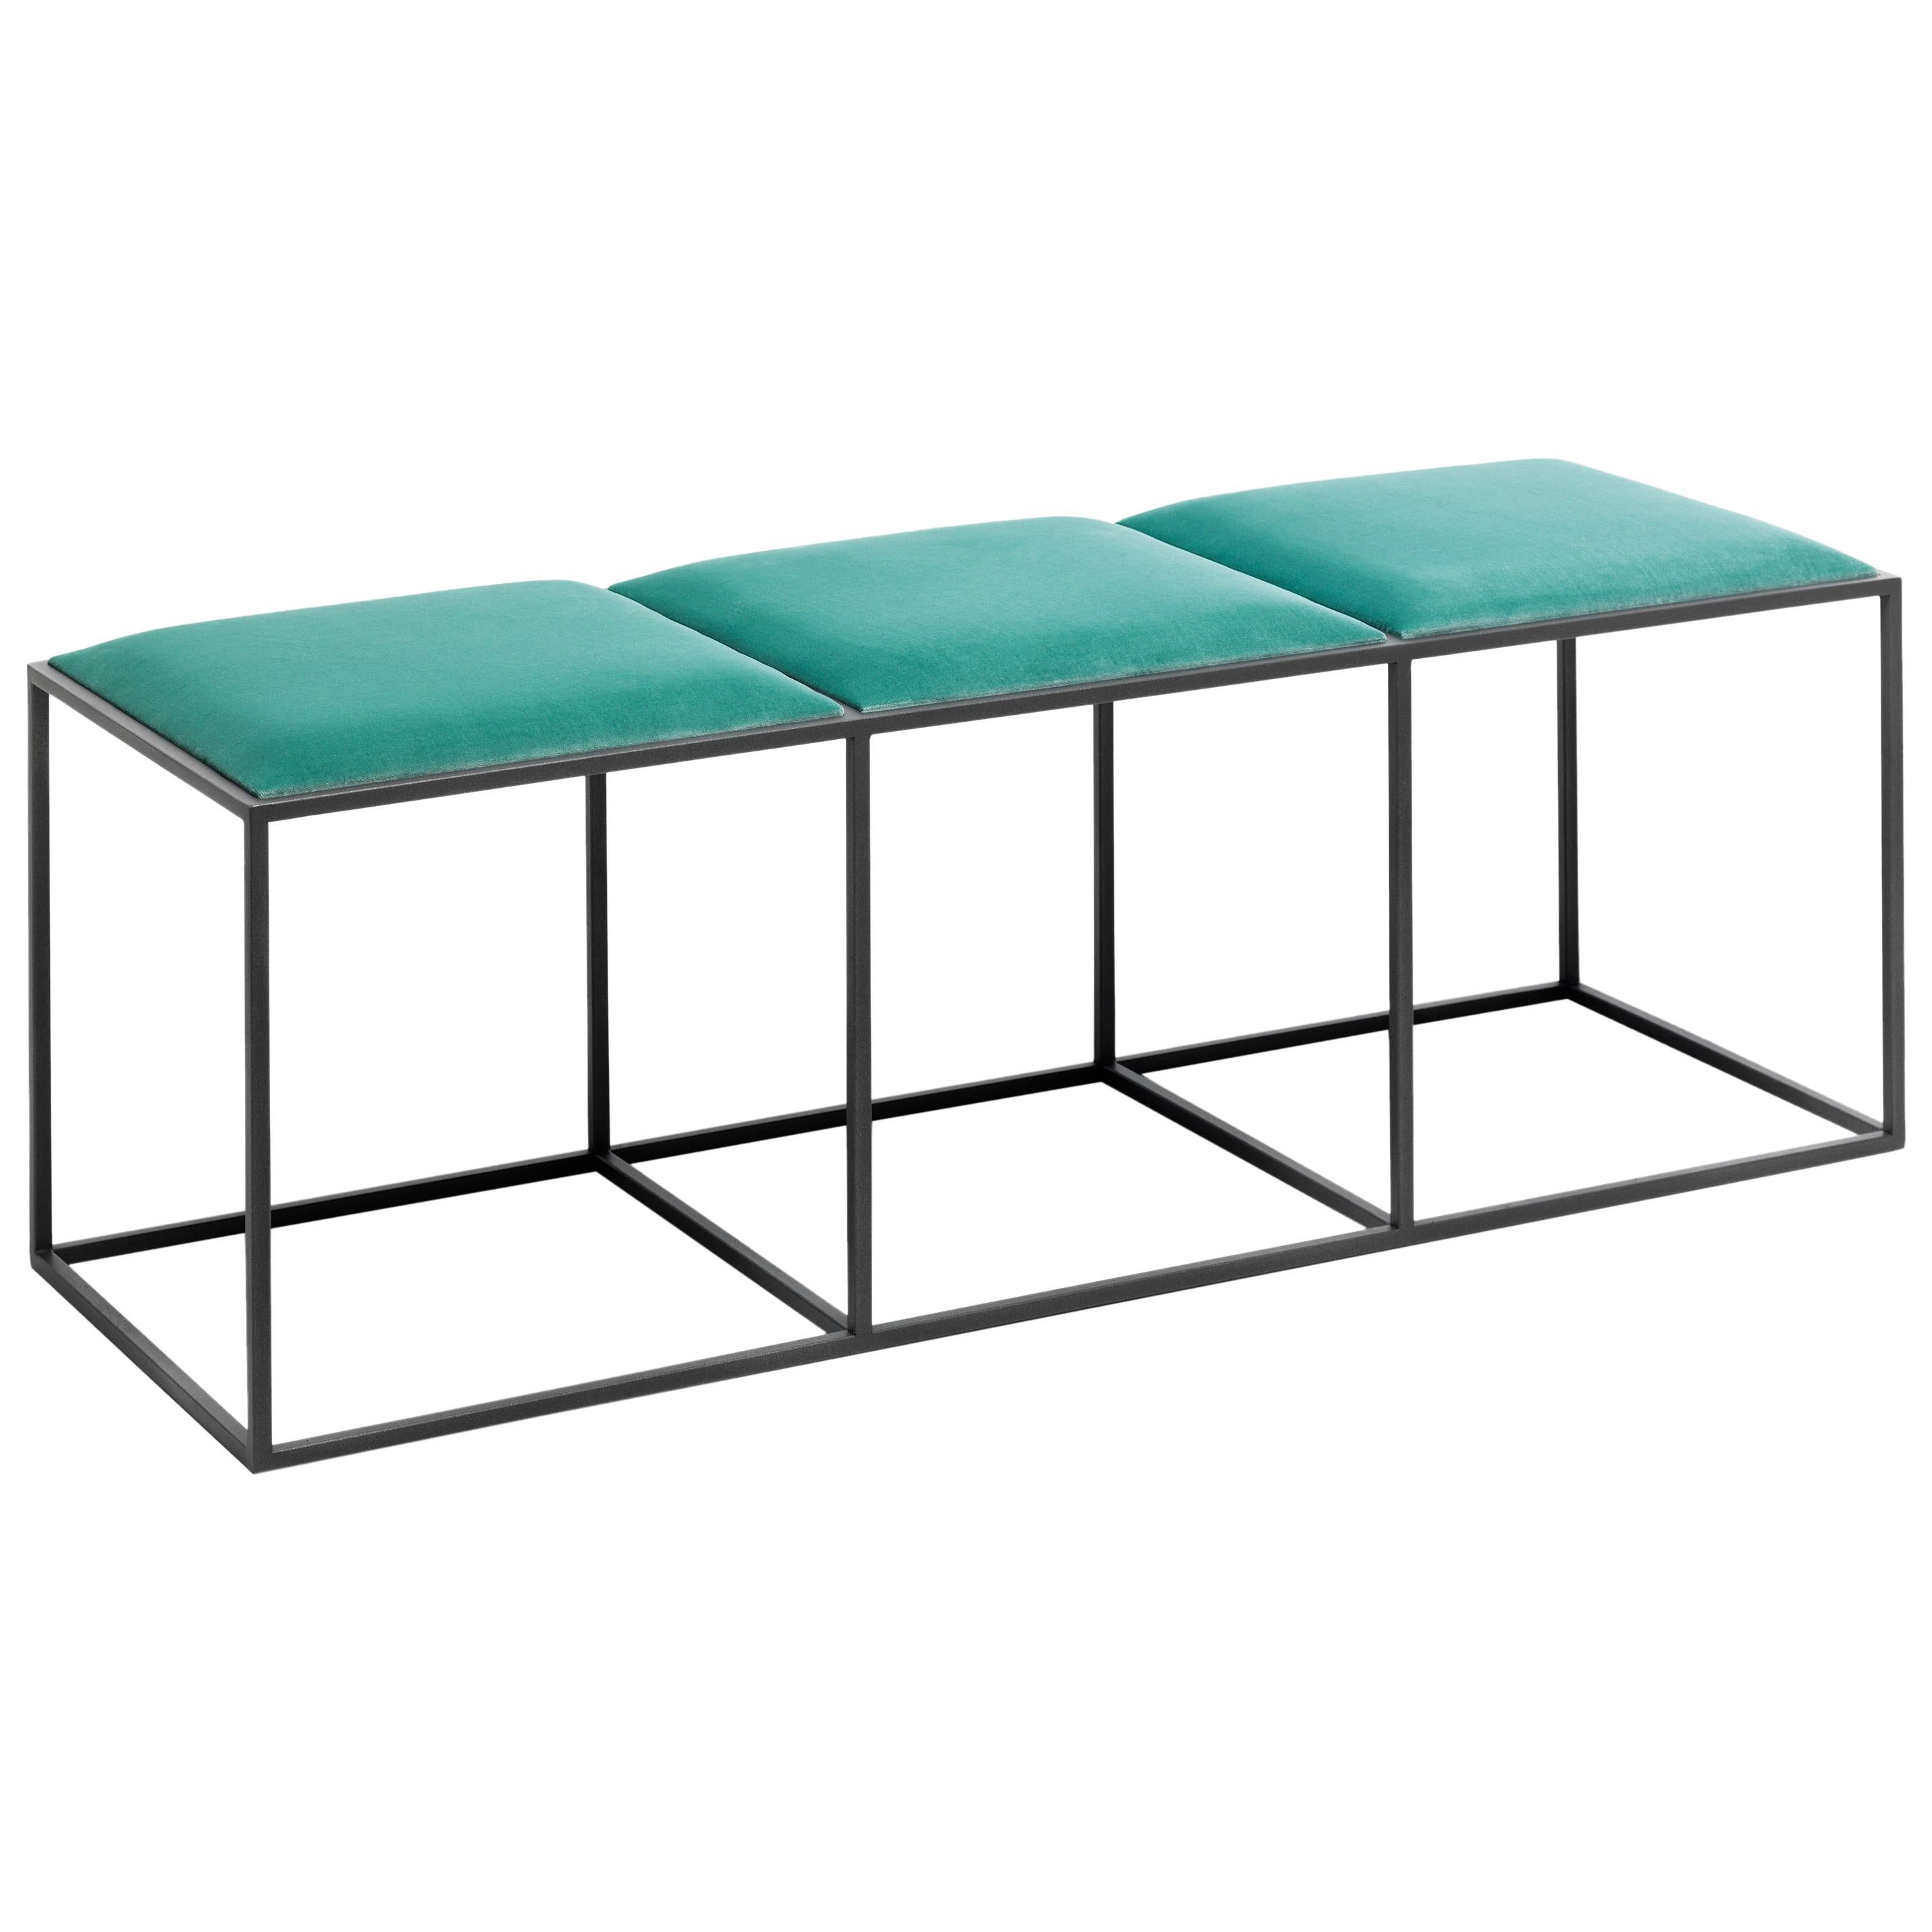 21st Century Modern Painted Steel Bench With Seats In Cotton Velvet